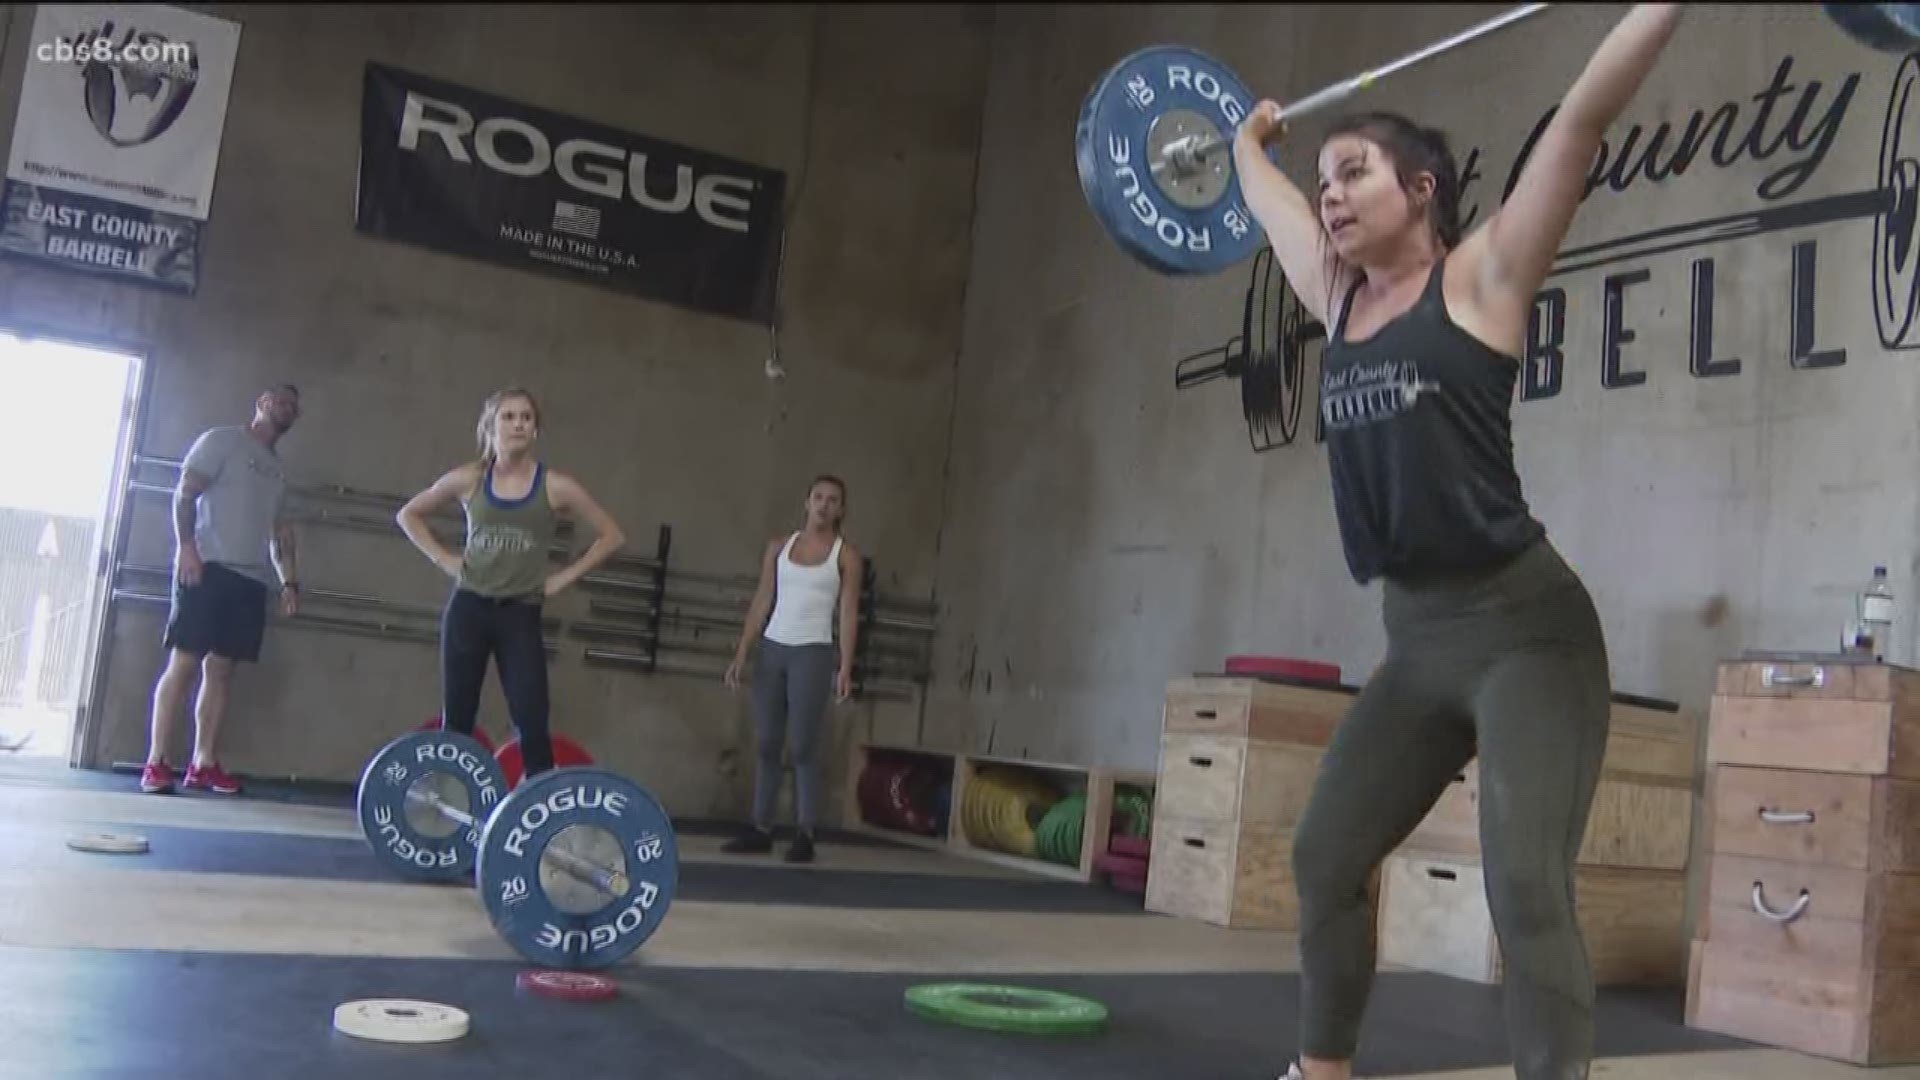 Teaching young women how to be strong is worth its weight in gold. In Tuesday's Zevely Zone, Jeff visited the East County Barbell Weightlifting Club in El Cajon for some serious Girl Power. Life can get heavy for teenagers, so the East County Barbell Weightlifting Club is where girls come to "lighten" their load.